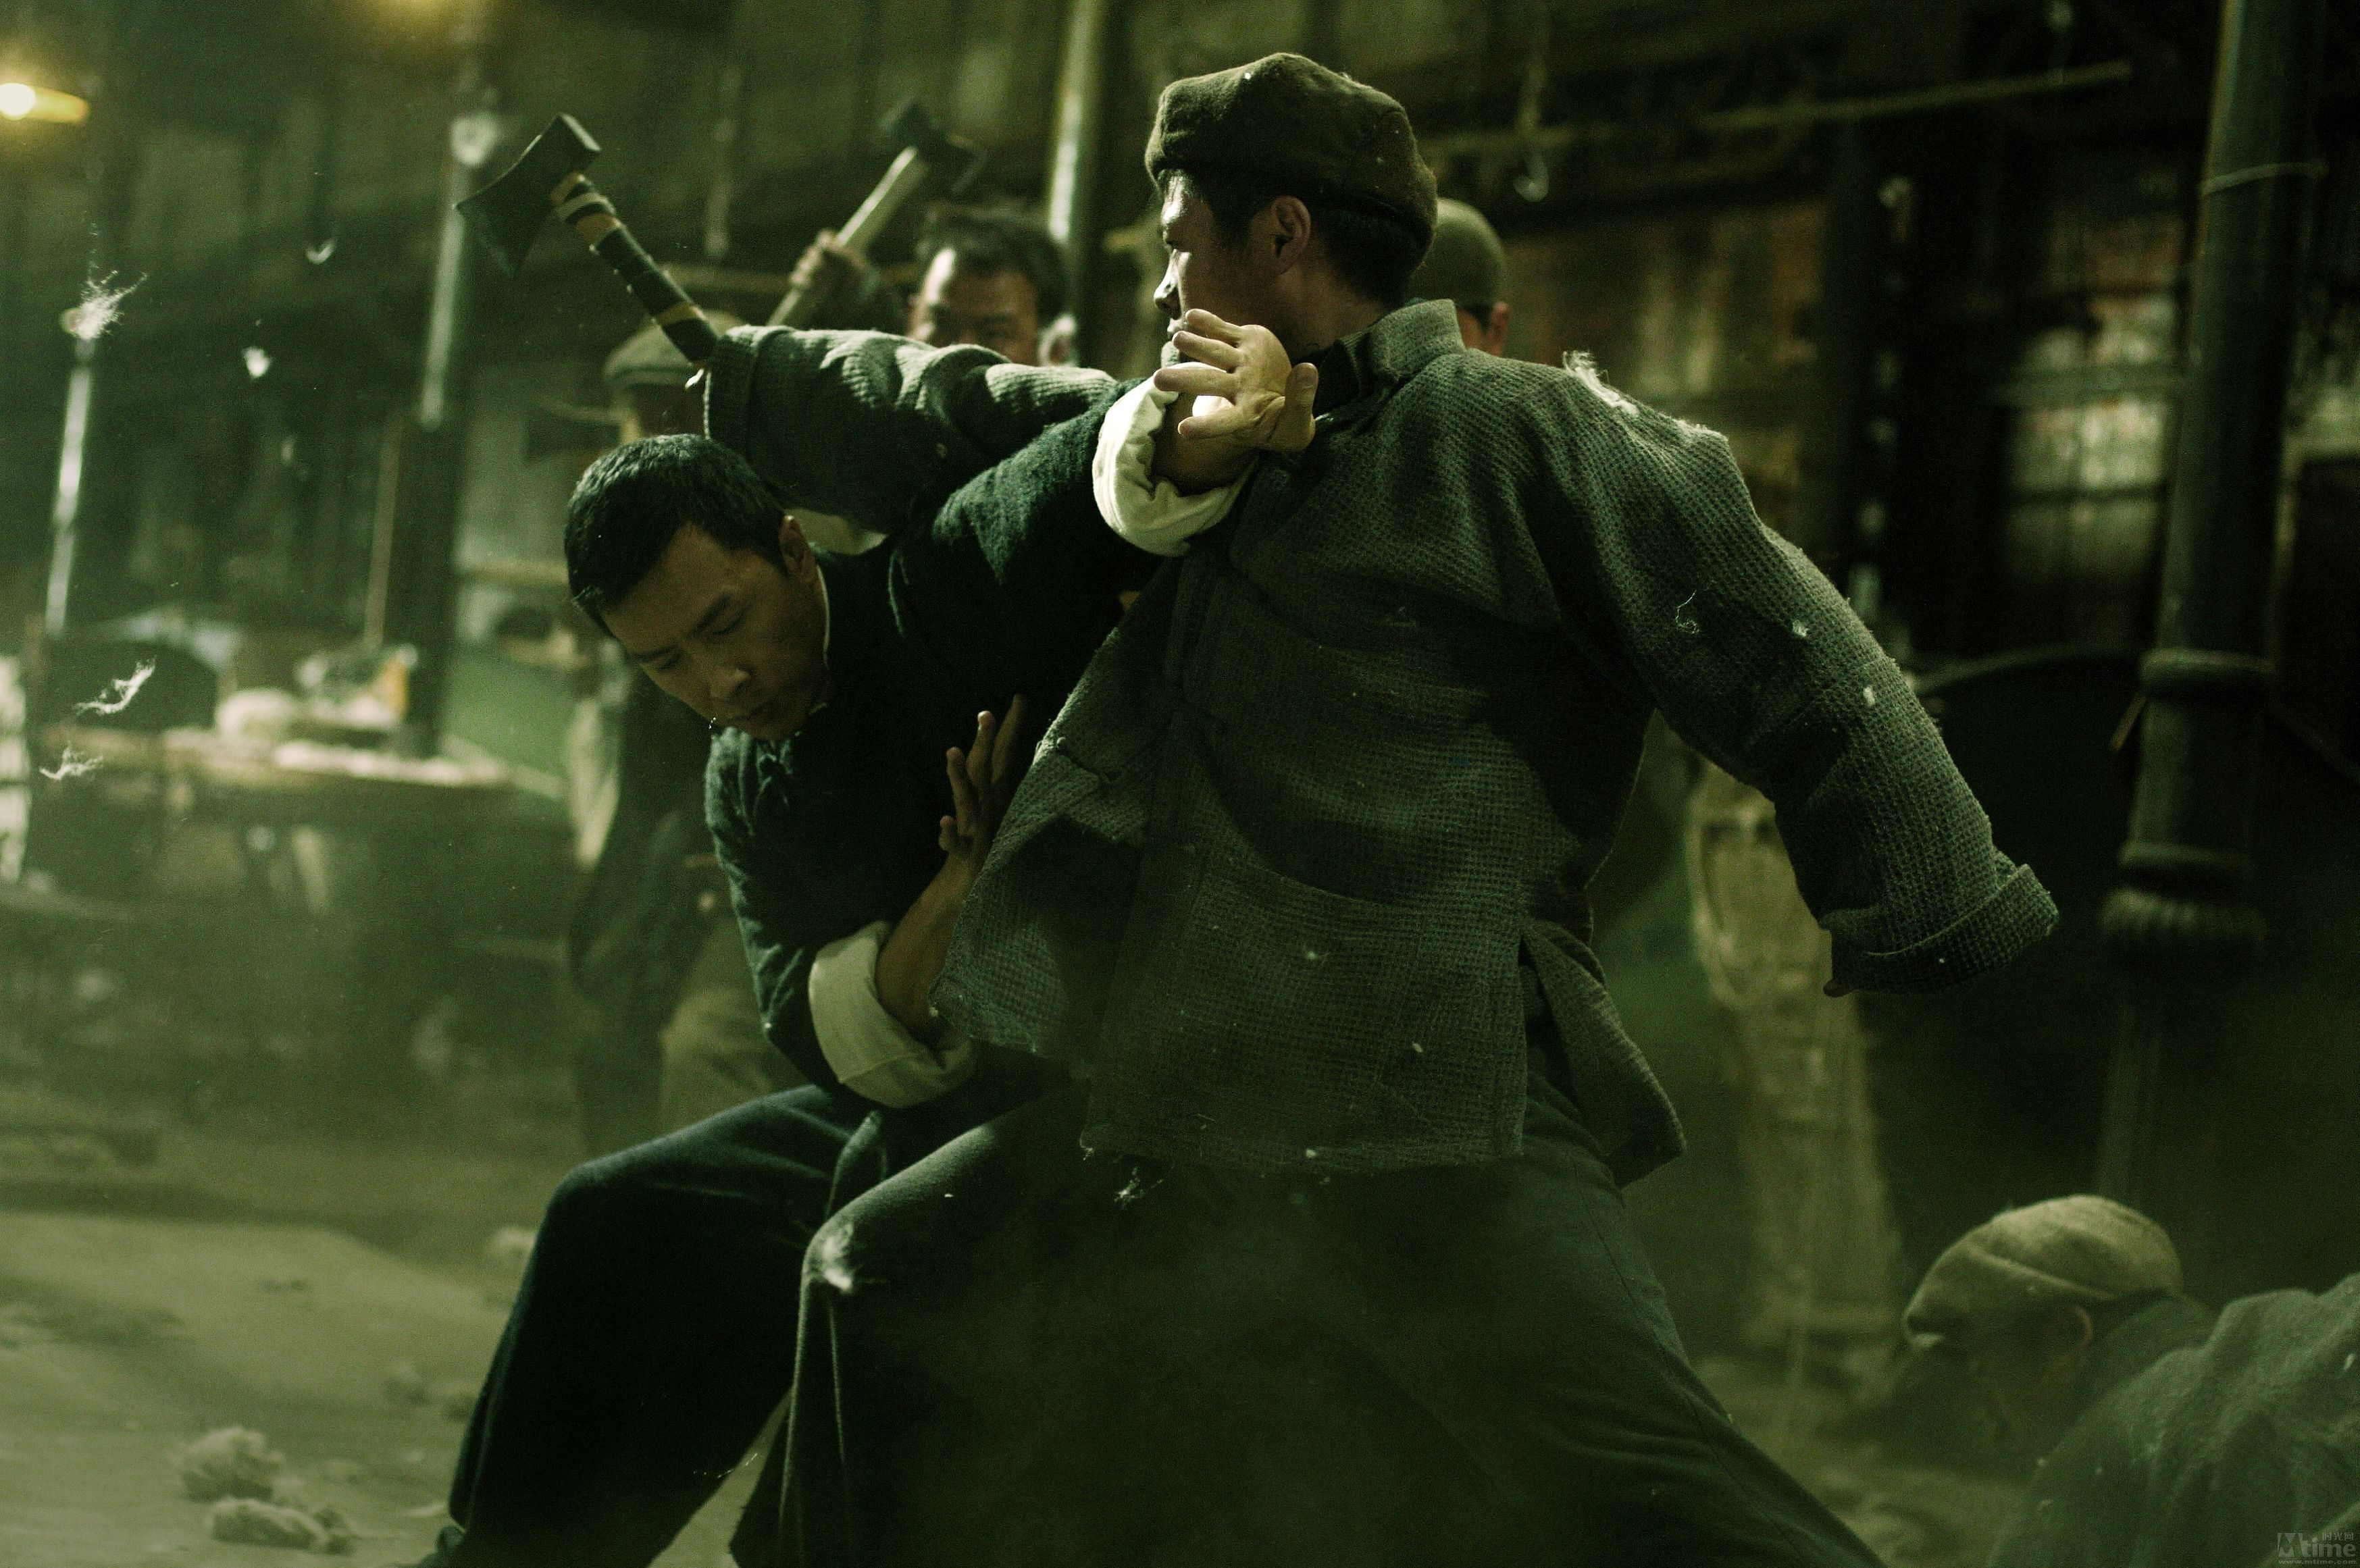 IP MAN 1 & 2 Double Bill at the Ritzy | Picturehouse Blog